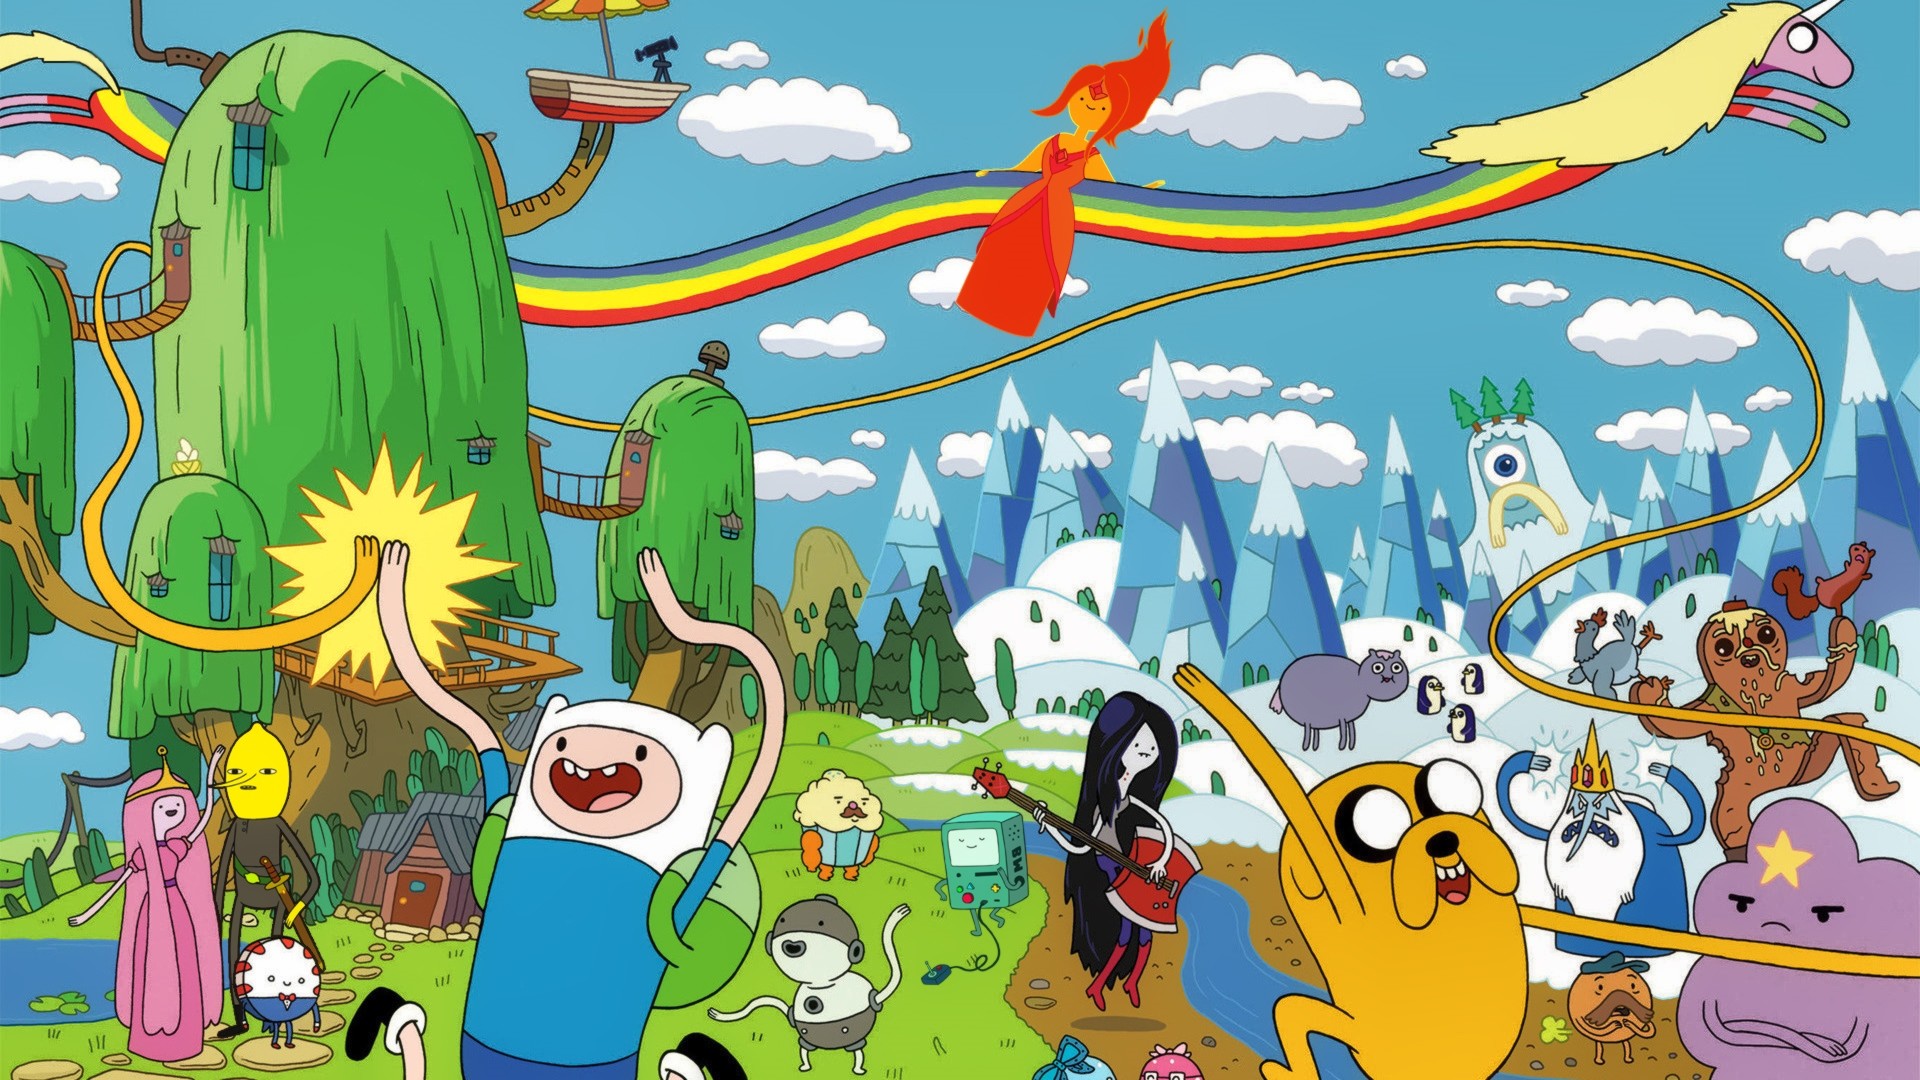 1920x1080 Adventure Time at night wallpaper hd Adventure Time Background 1